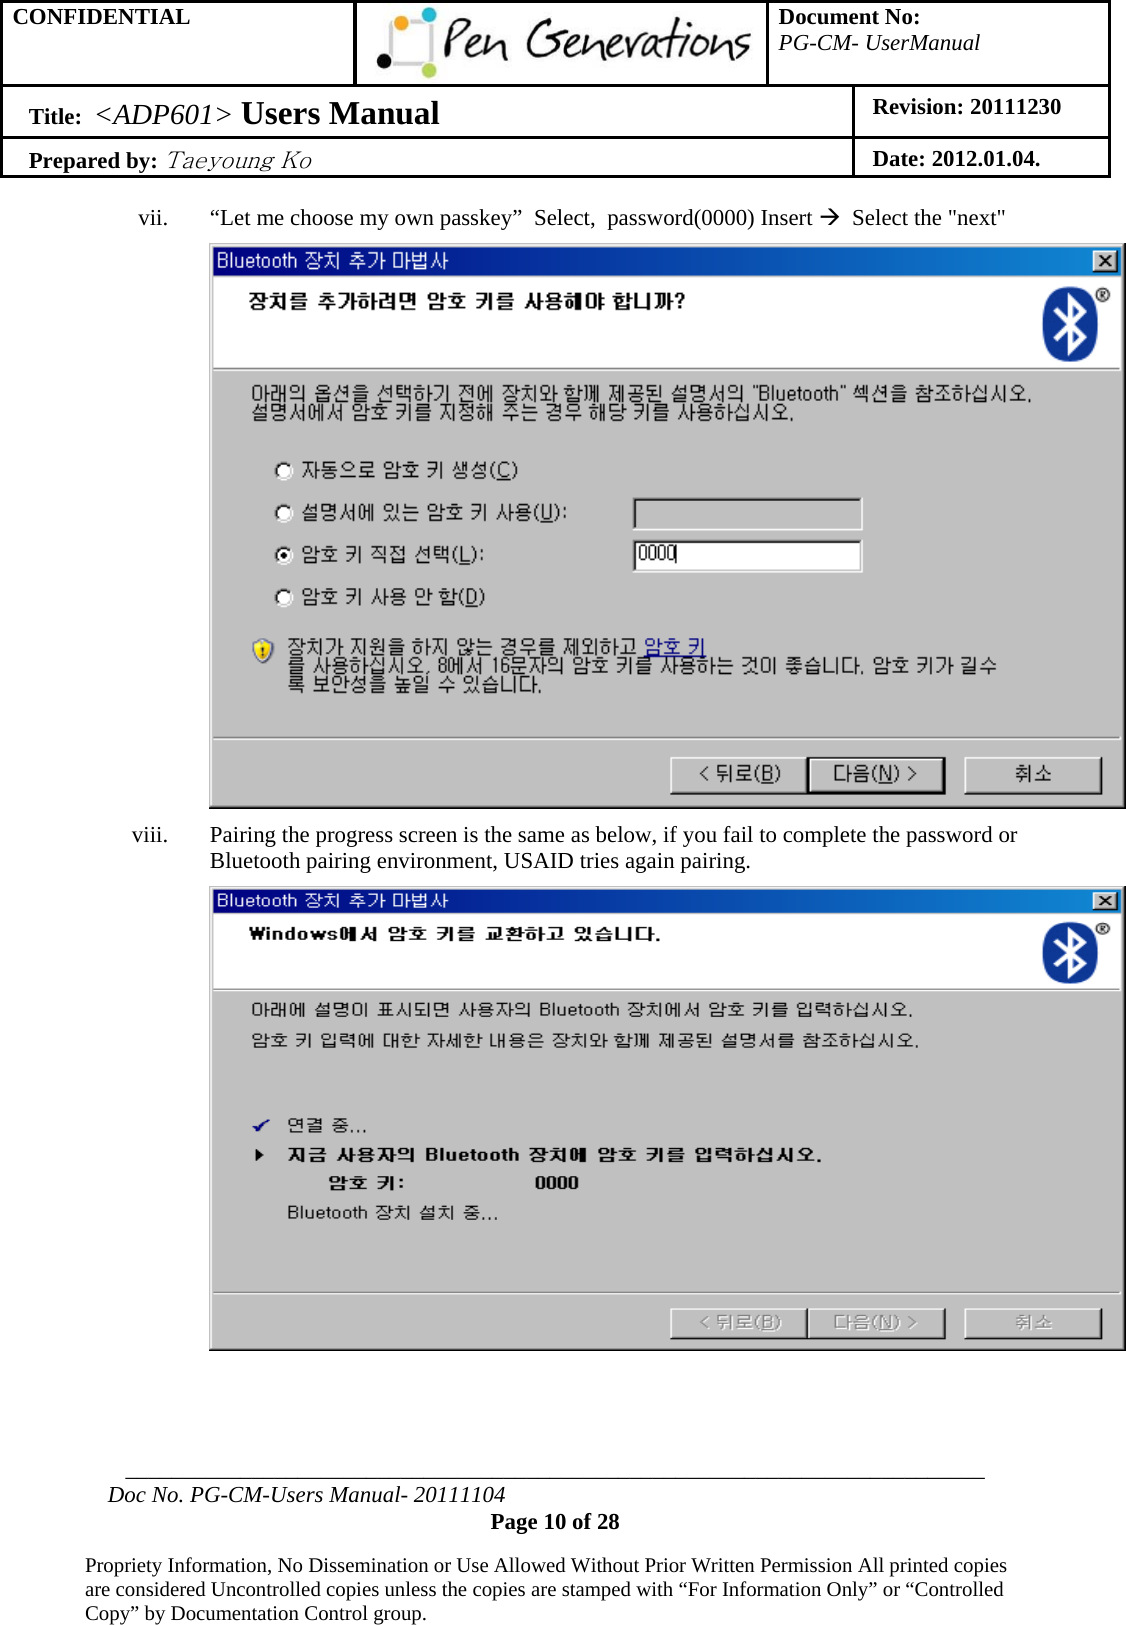 CONFIDENTIAL  Document No: PG-CM- UserManual Title:  &lt;ADP601&gt; Users Manual   Revision: 20111230 Prepared by: Taeyoung Ko Date: 2012.01.04.  ___________________________________________________________________________ Doc No. PG-CM-Users Manual- 20111104 Page 10 of 28  Propriety Information, No Dissemination or Use Allowed Without Prior Written Permission All printed copies are considered Uncontrolled copies unless the copies are stamped with “For Information Only” or “Controlled Copy” by Documentation Control group.  vii. “Let me choose my own passkey”  Select,  password(0000) Insert Æ  Select the &quot;next&quot;  viii. Pairing the progress screen is the same as below, if you fail to complete the password or Bluetooth pairing environment, USAID tries again pairing.    